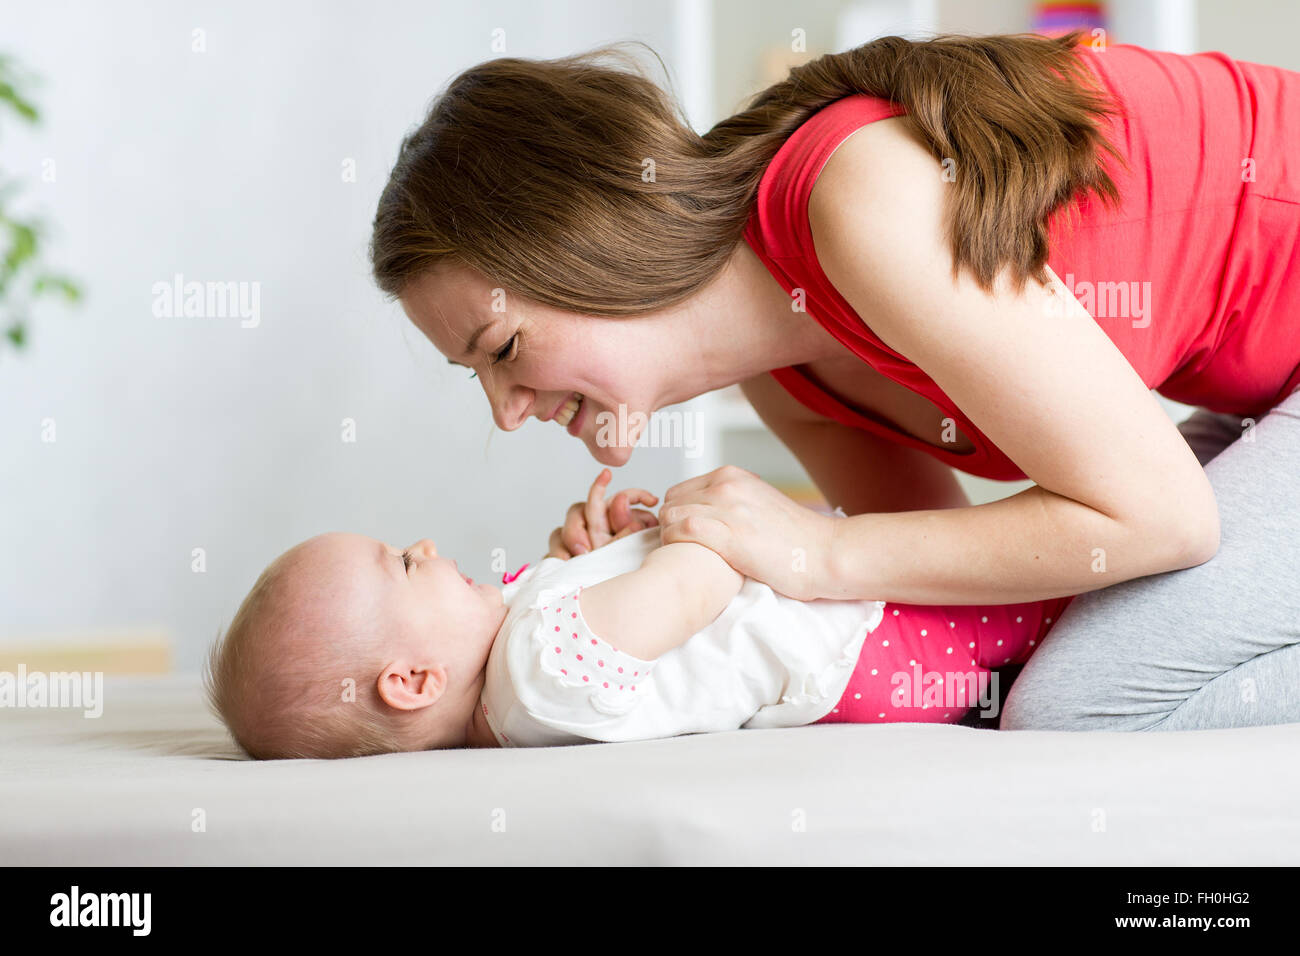 Cute mother with her baby having fun pastime Stock Photo